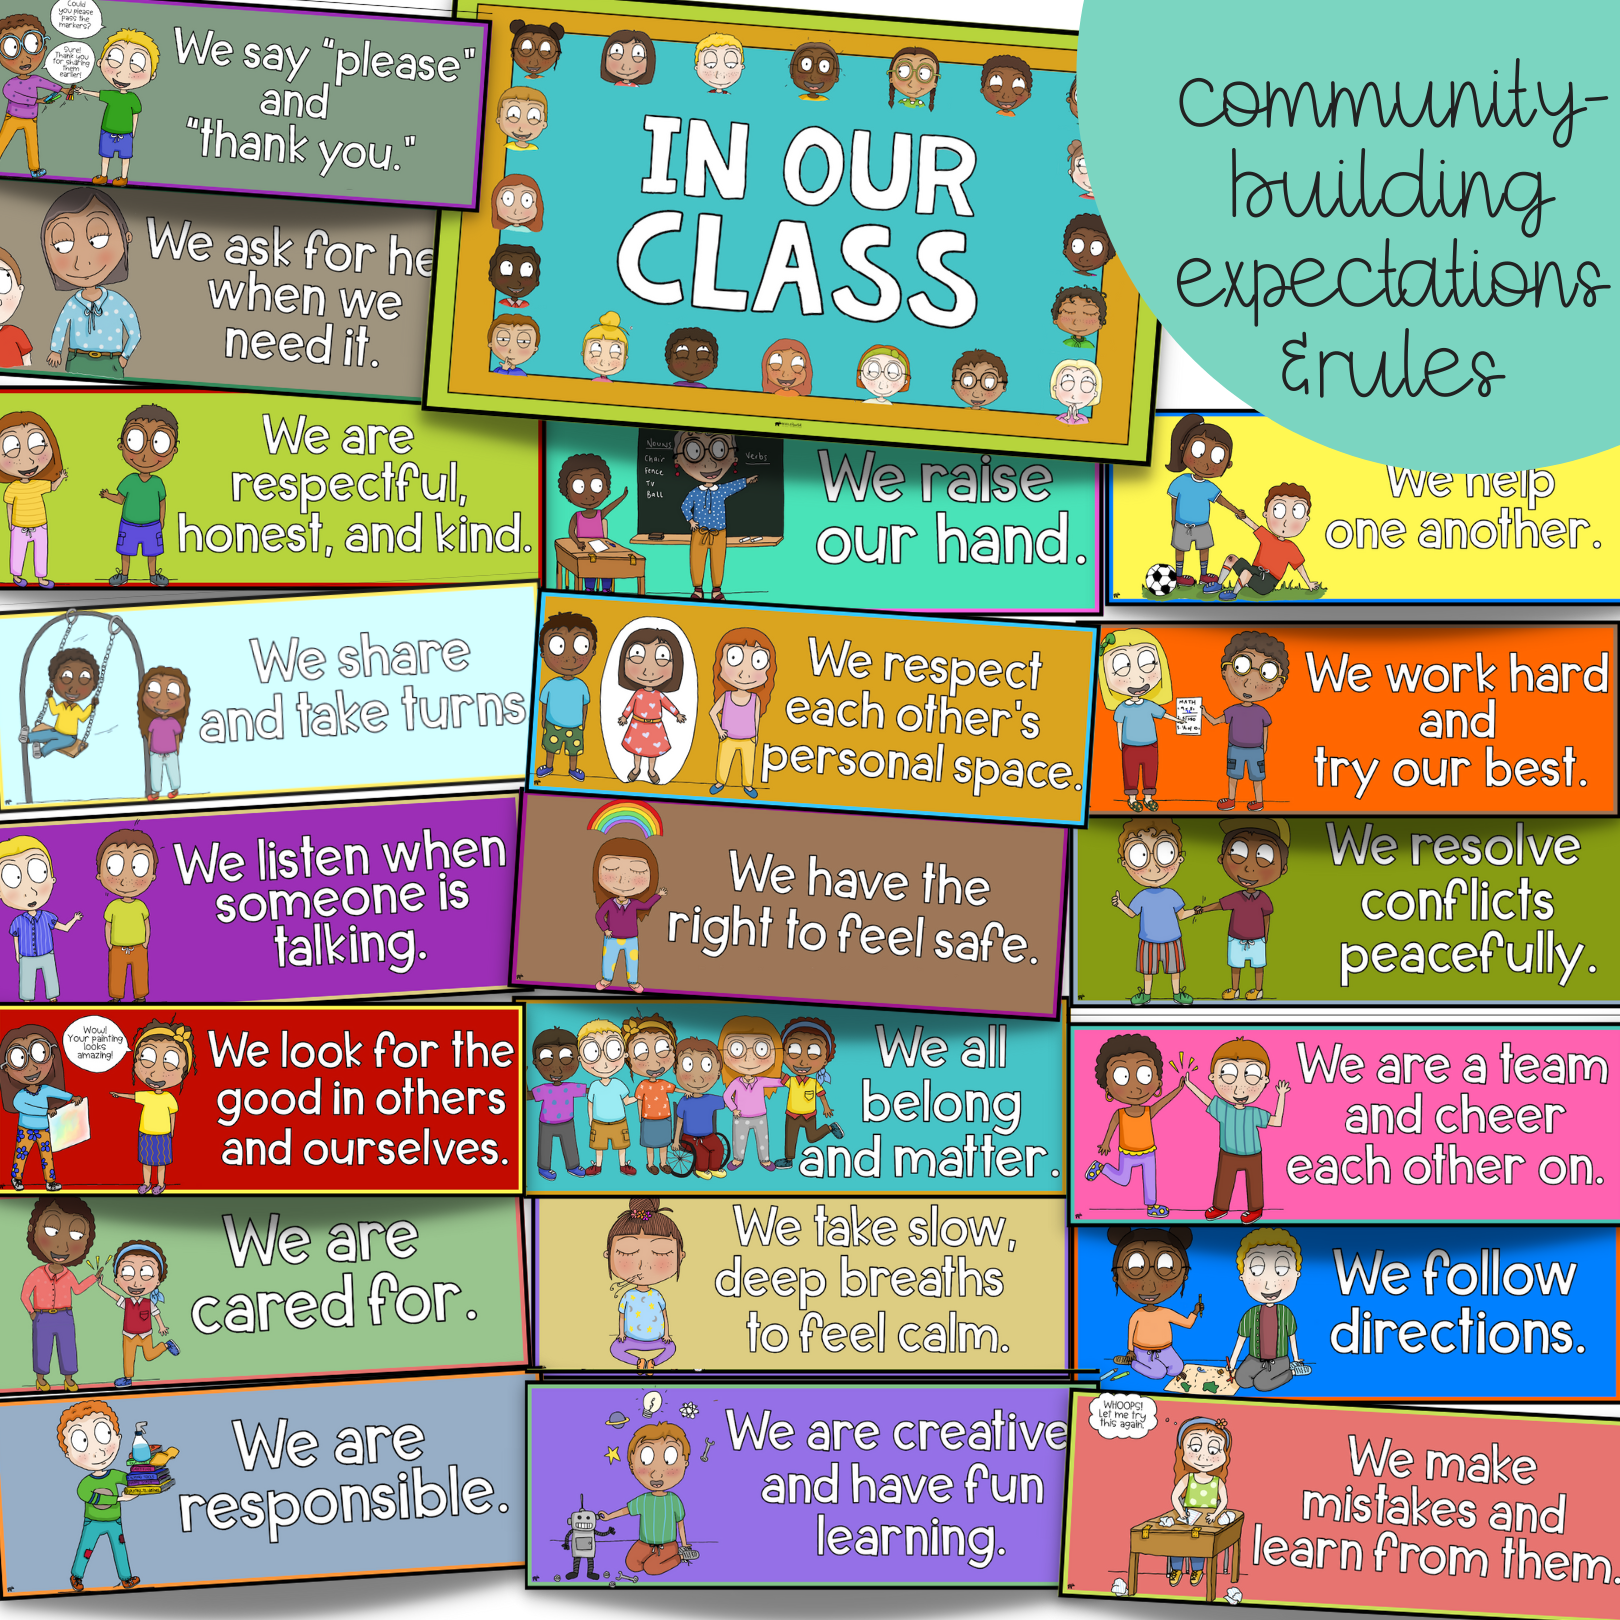 In Our Class Community Building Expectations and Rules